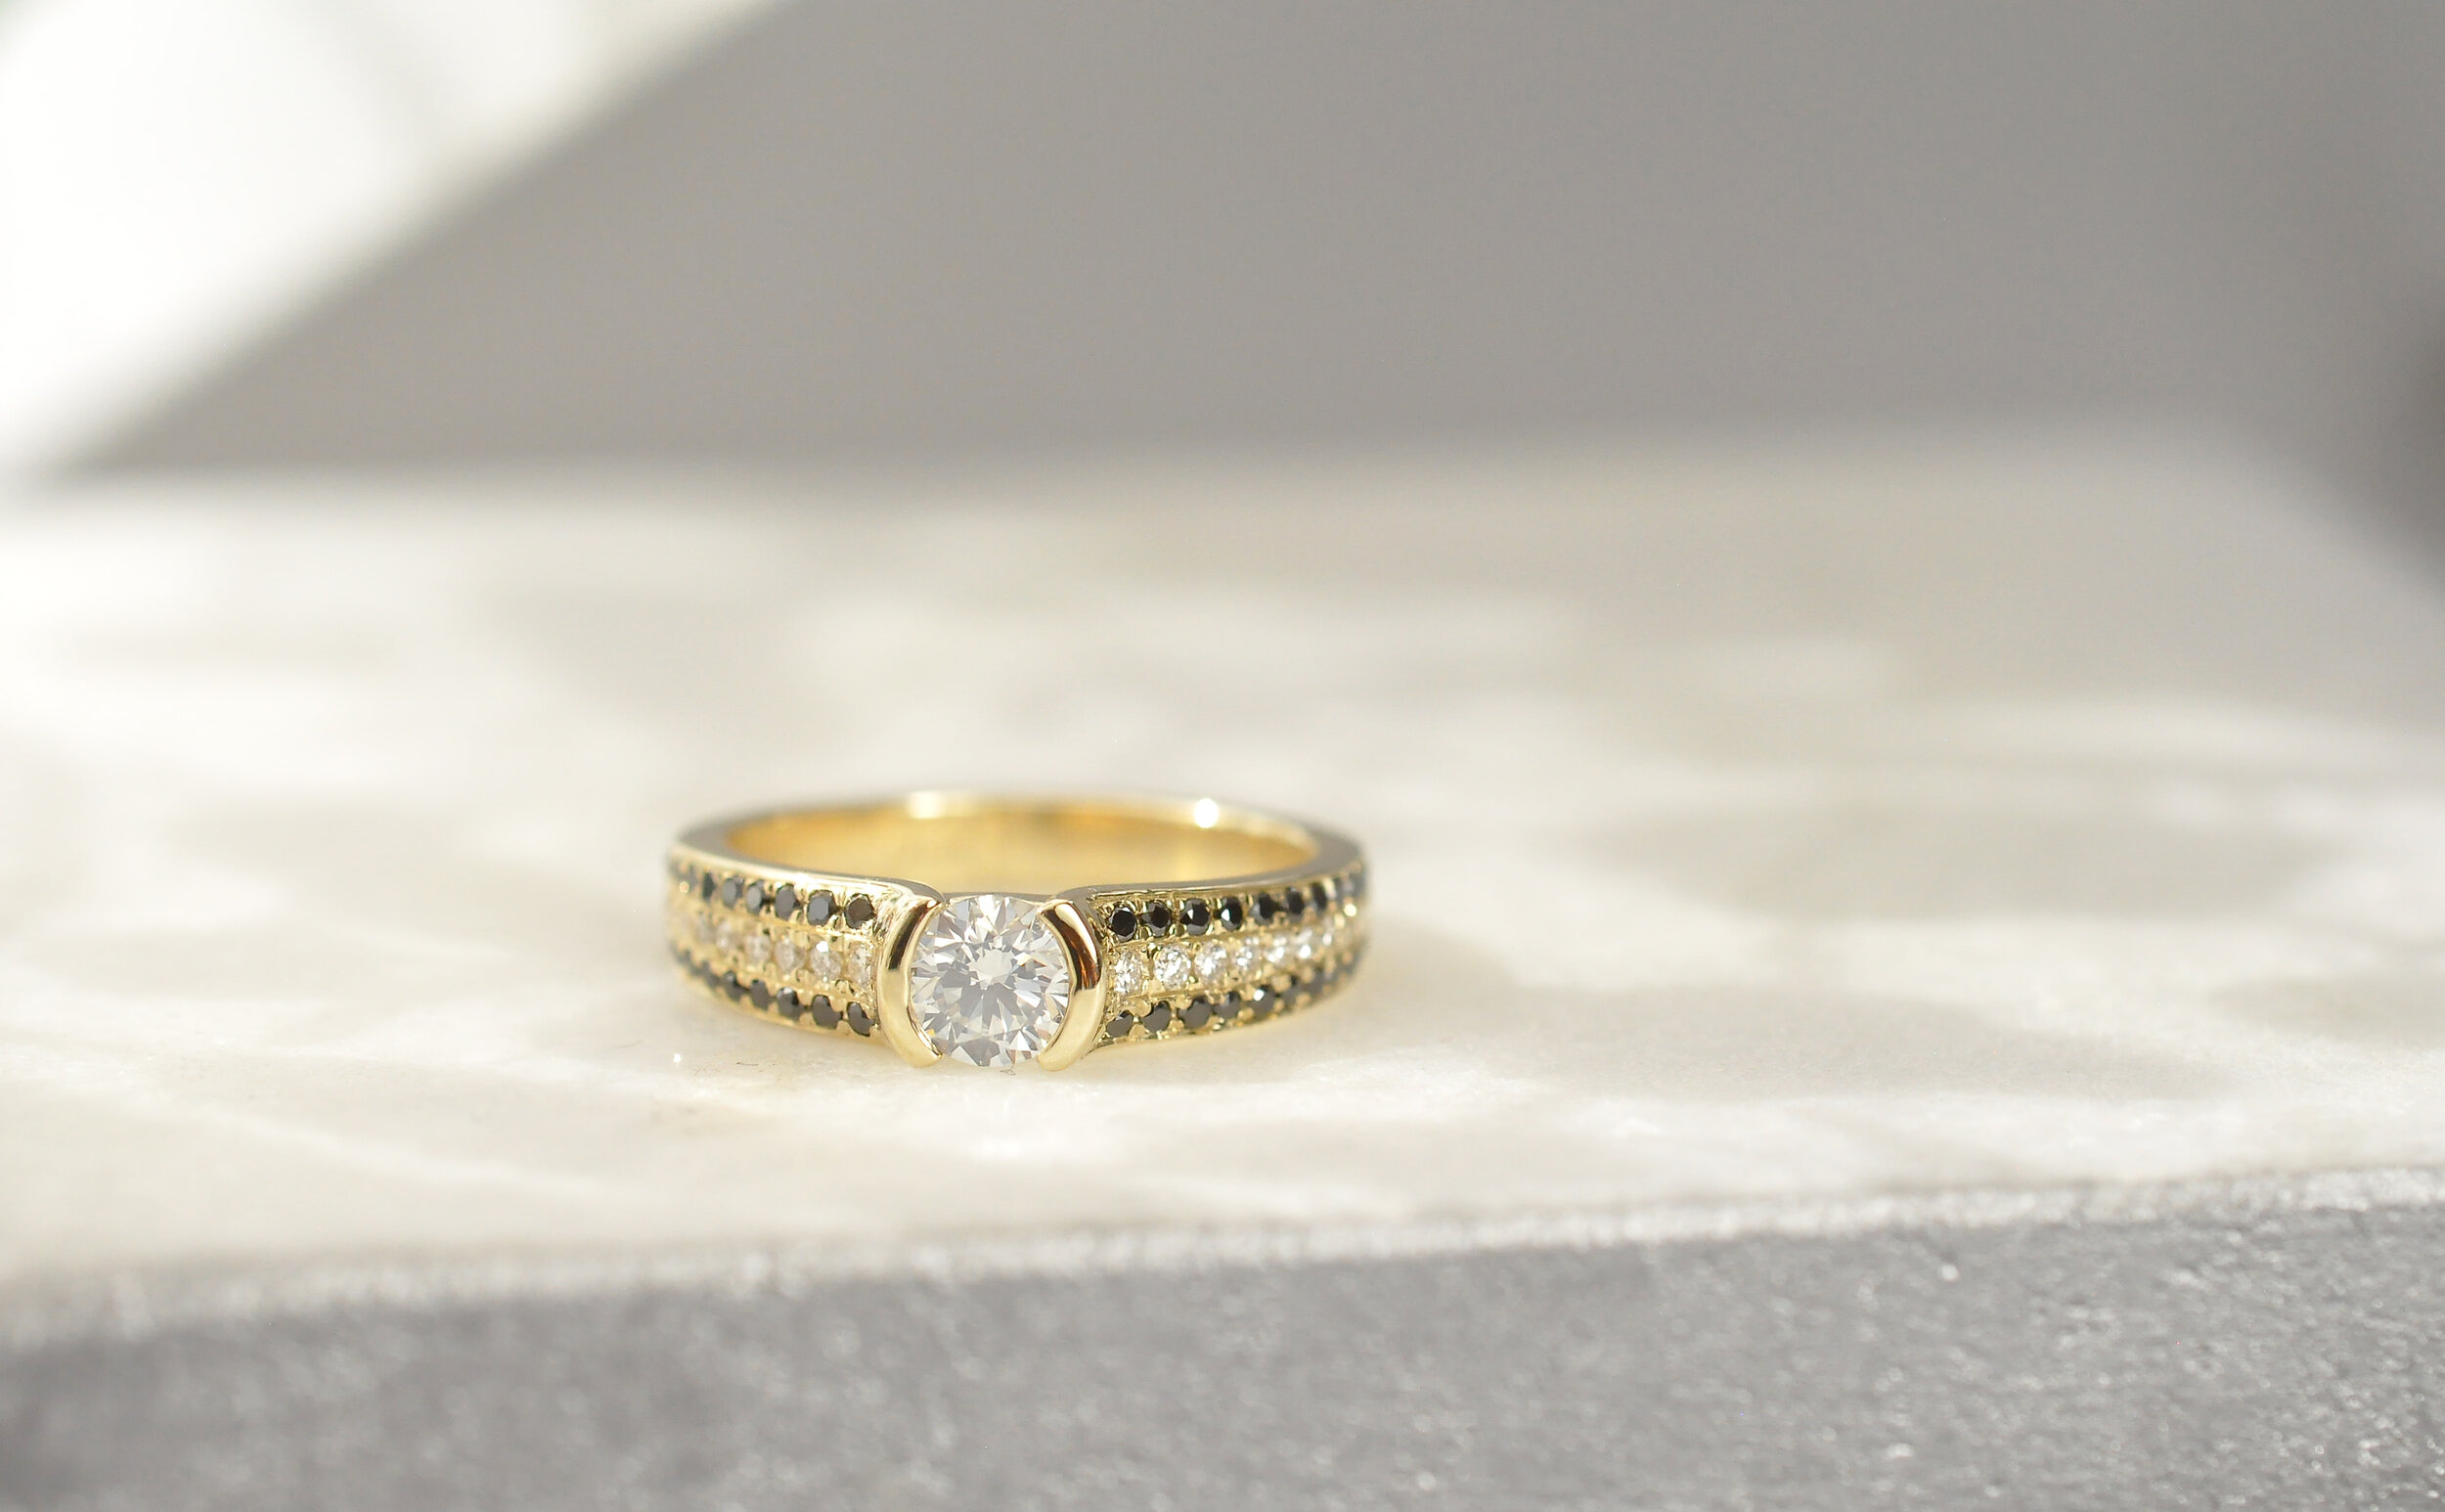 Design Your Custom Black Diamond Engagement Ring | Alexis Russell